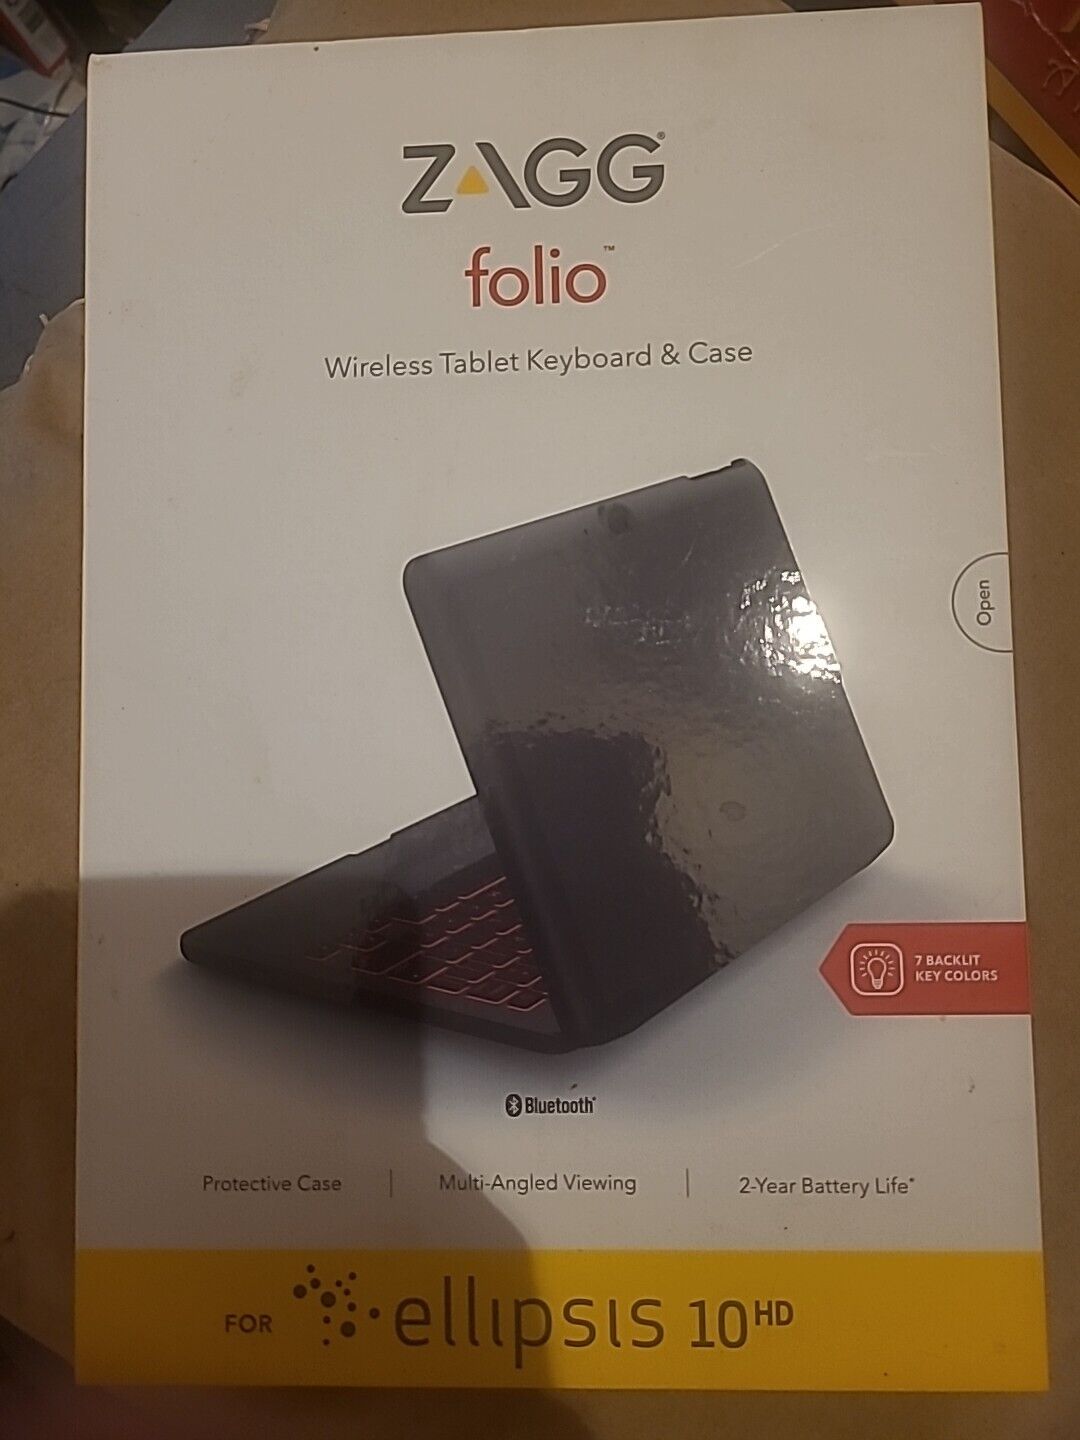 ZAGG Folio Series Wireless Tablet Keyboard and Case for Ellipsis 10 HD - NEW